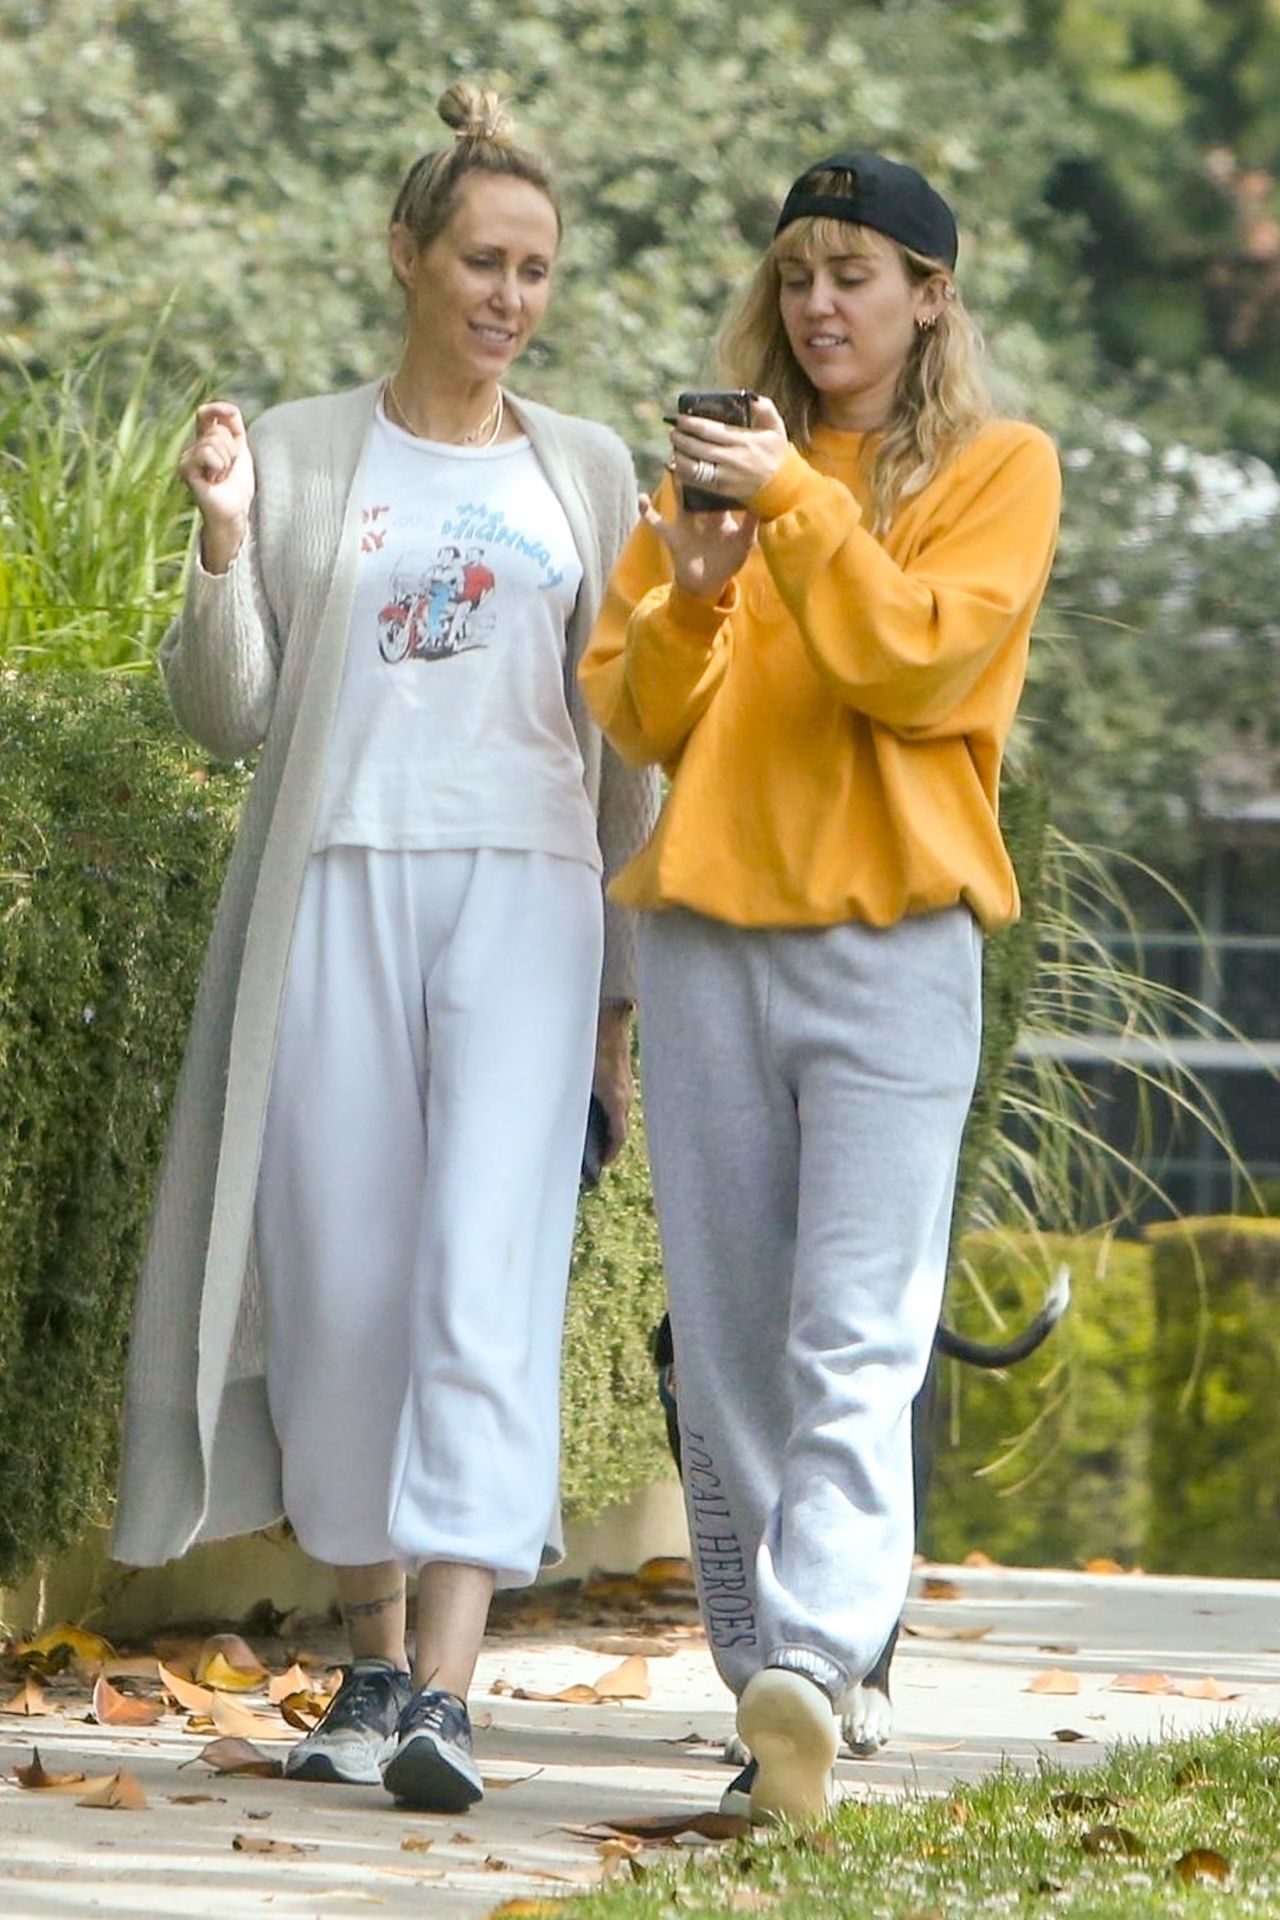 https://celebmafia.com/wp-content/uploads/2019/06/miley-cyrus-with-her-mom-out-in-los-angeles-06-05-2019-1.jpg